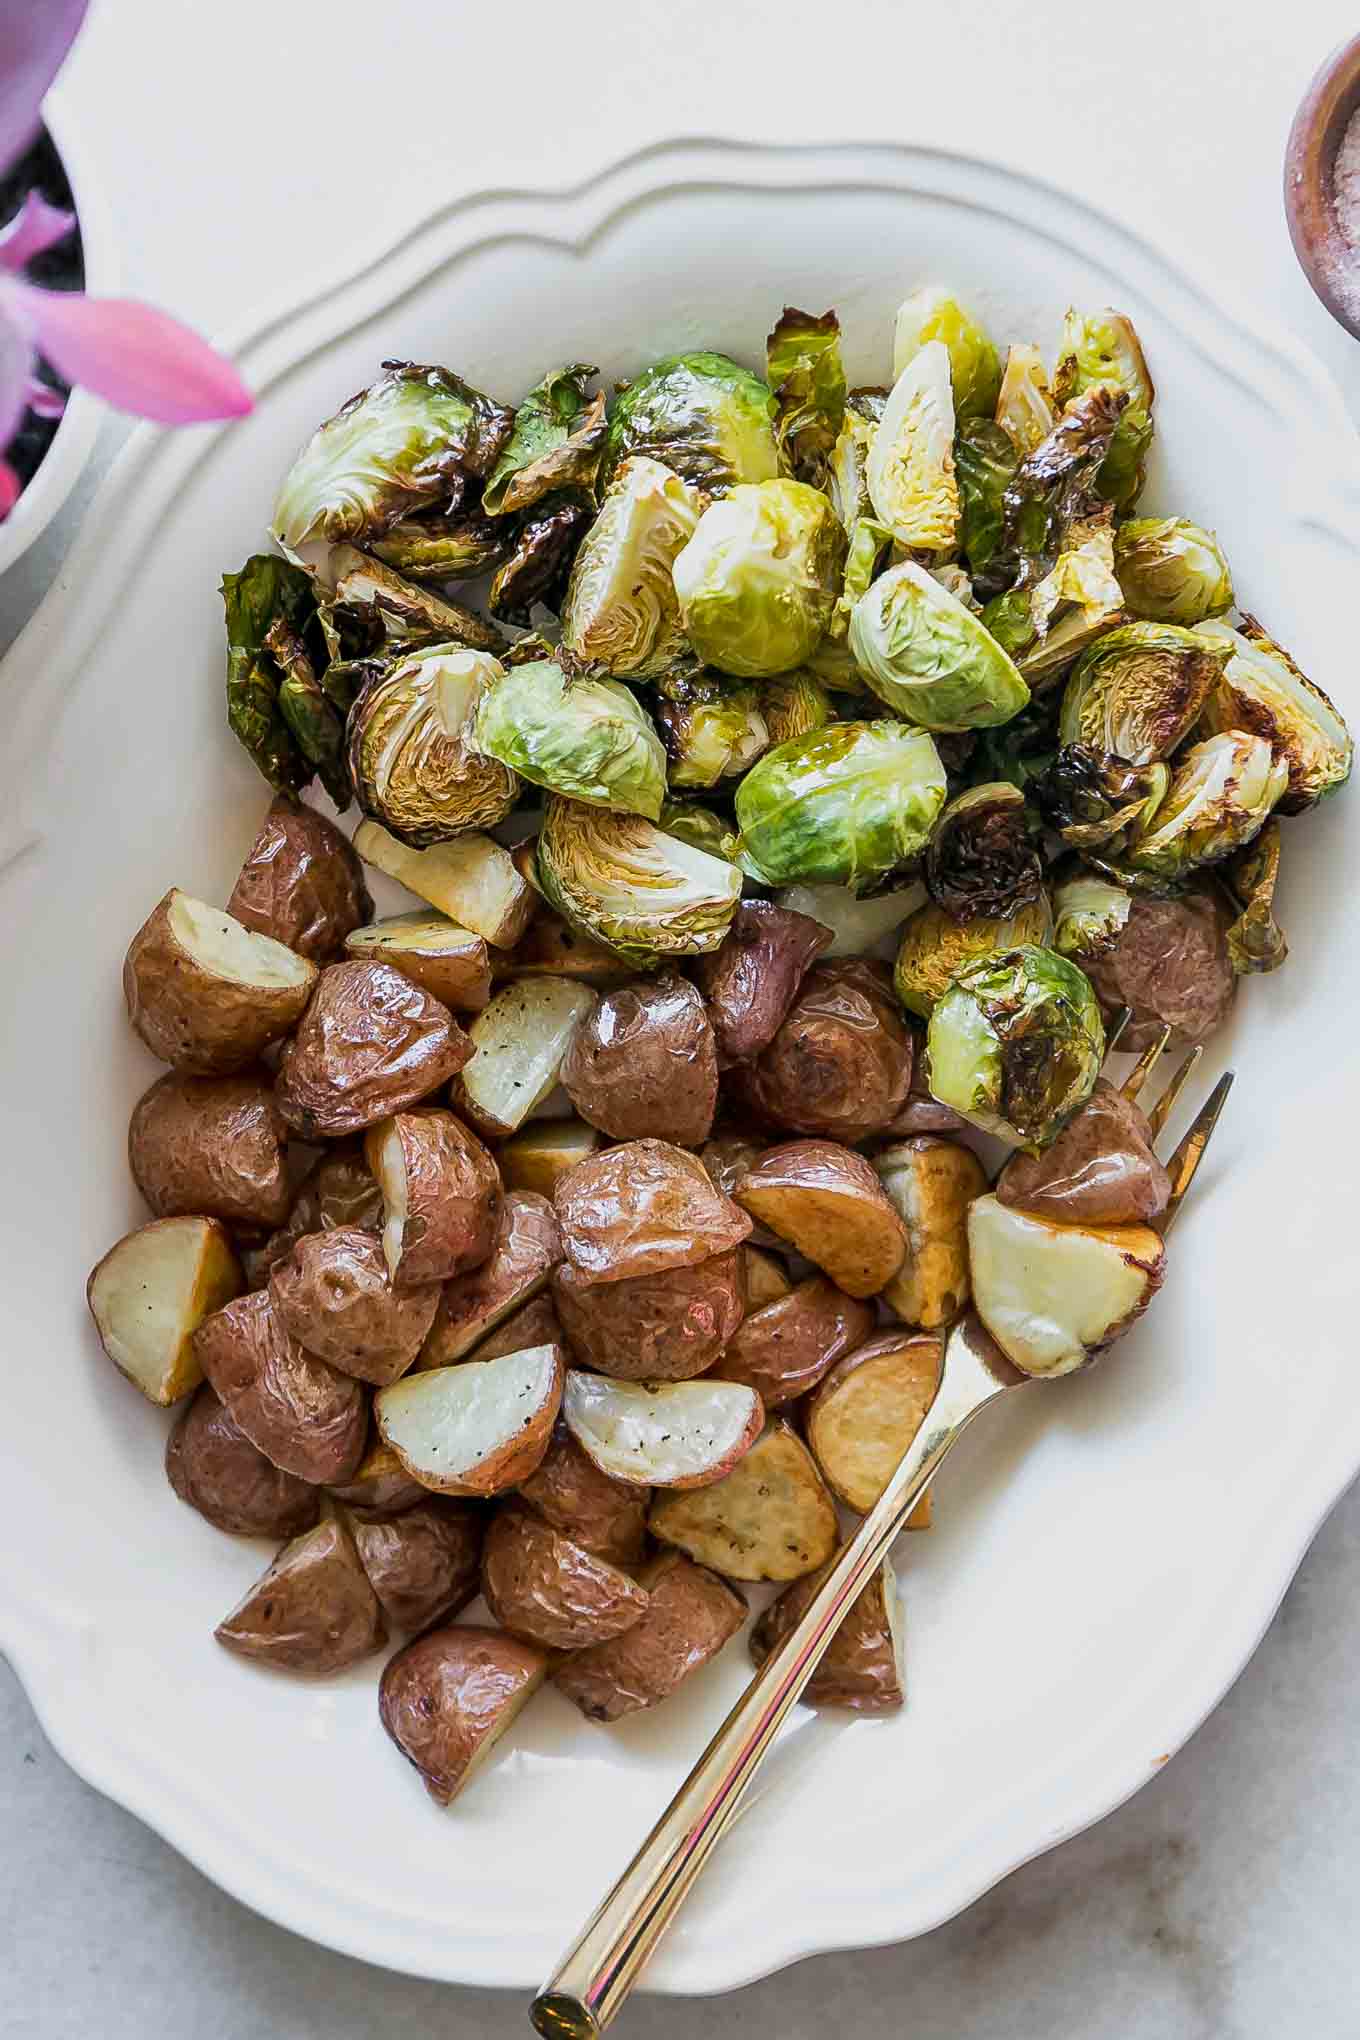 baked potatoes and brussels sprouts on a white plate with a gold fork